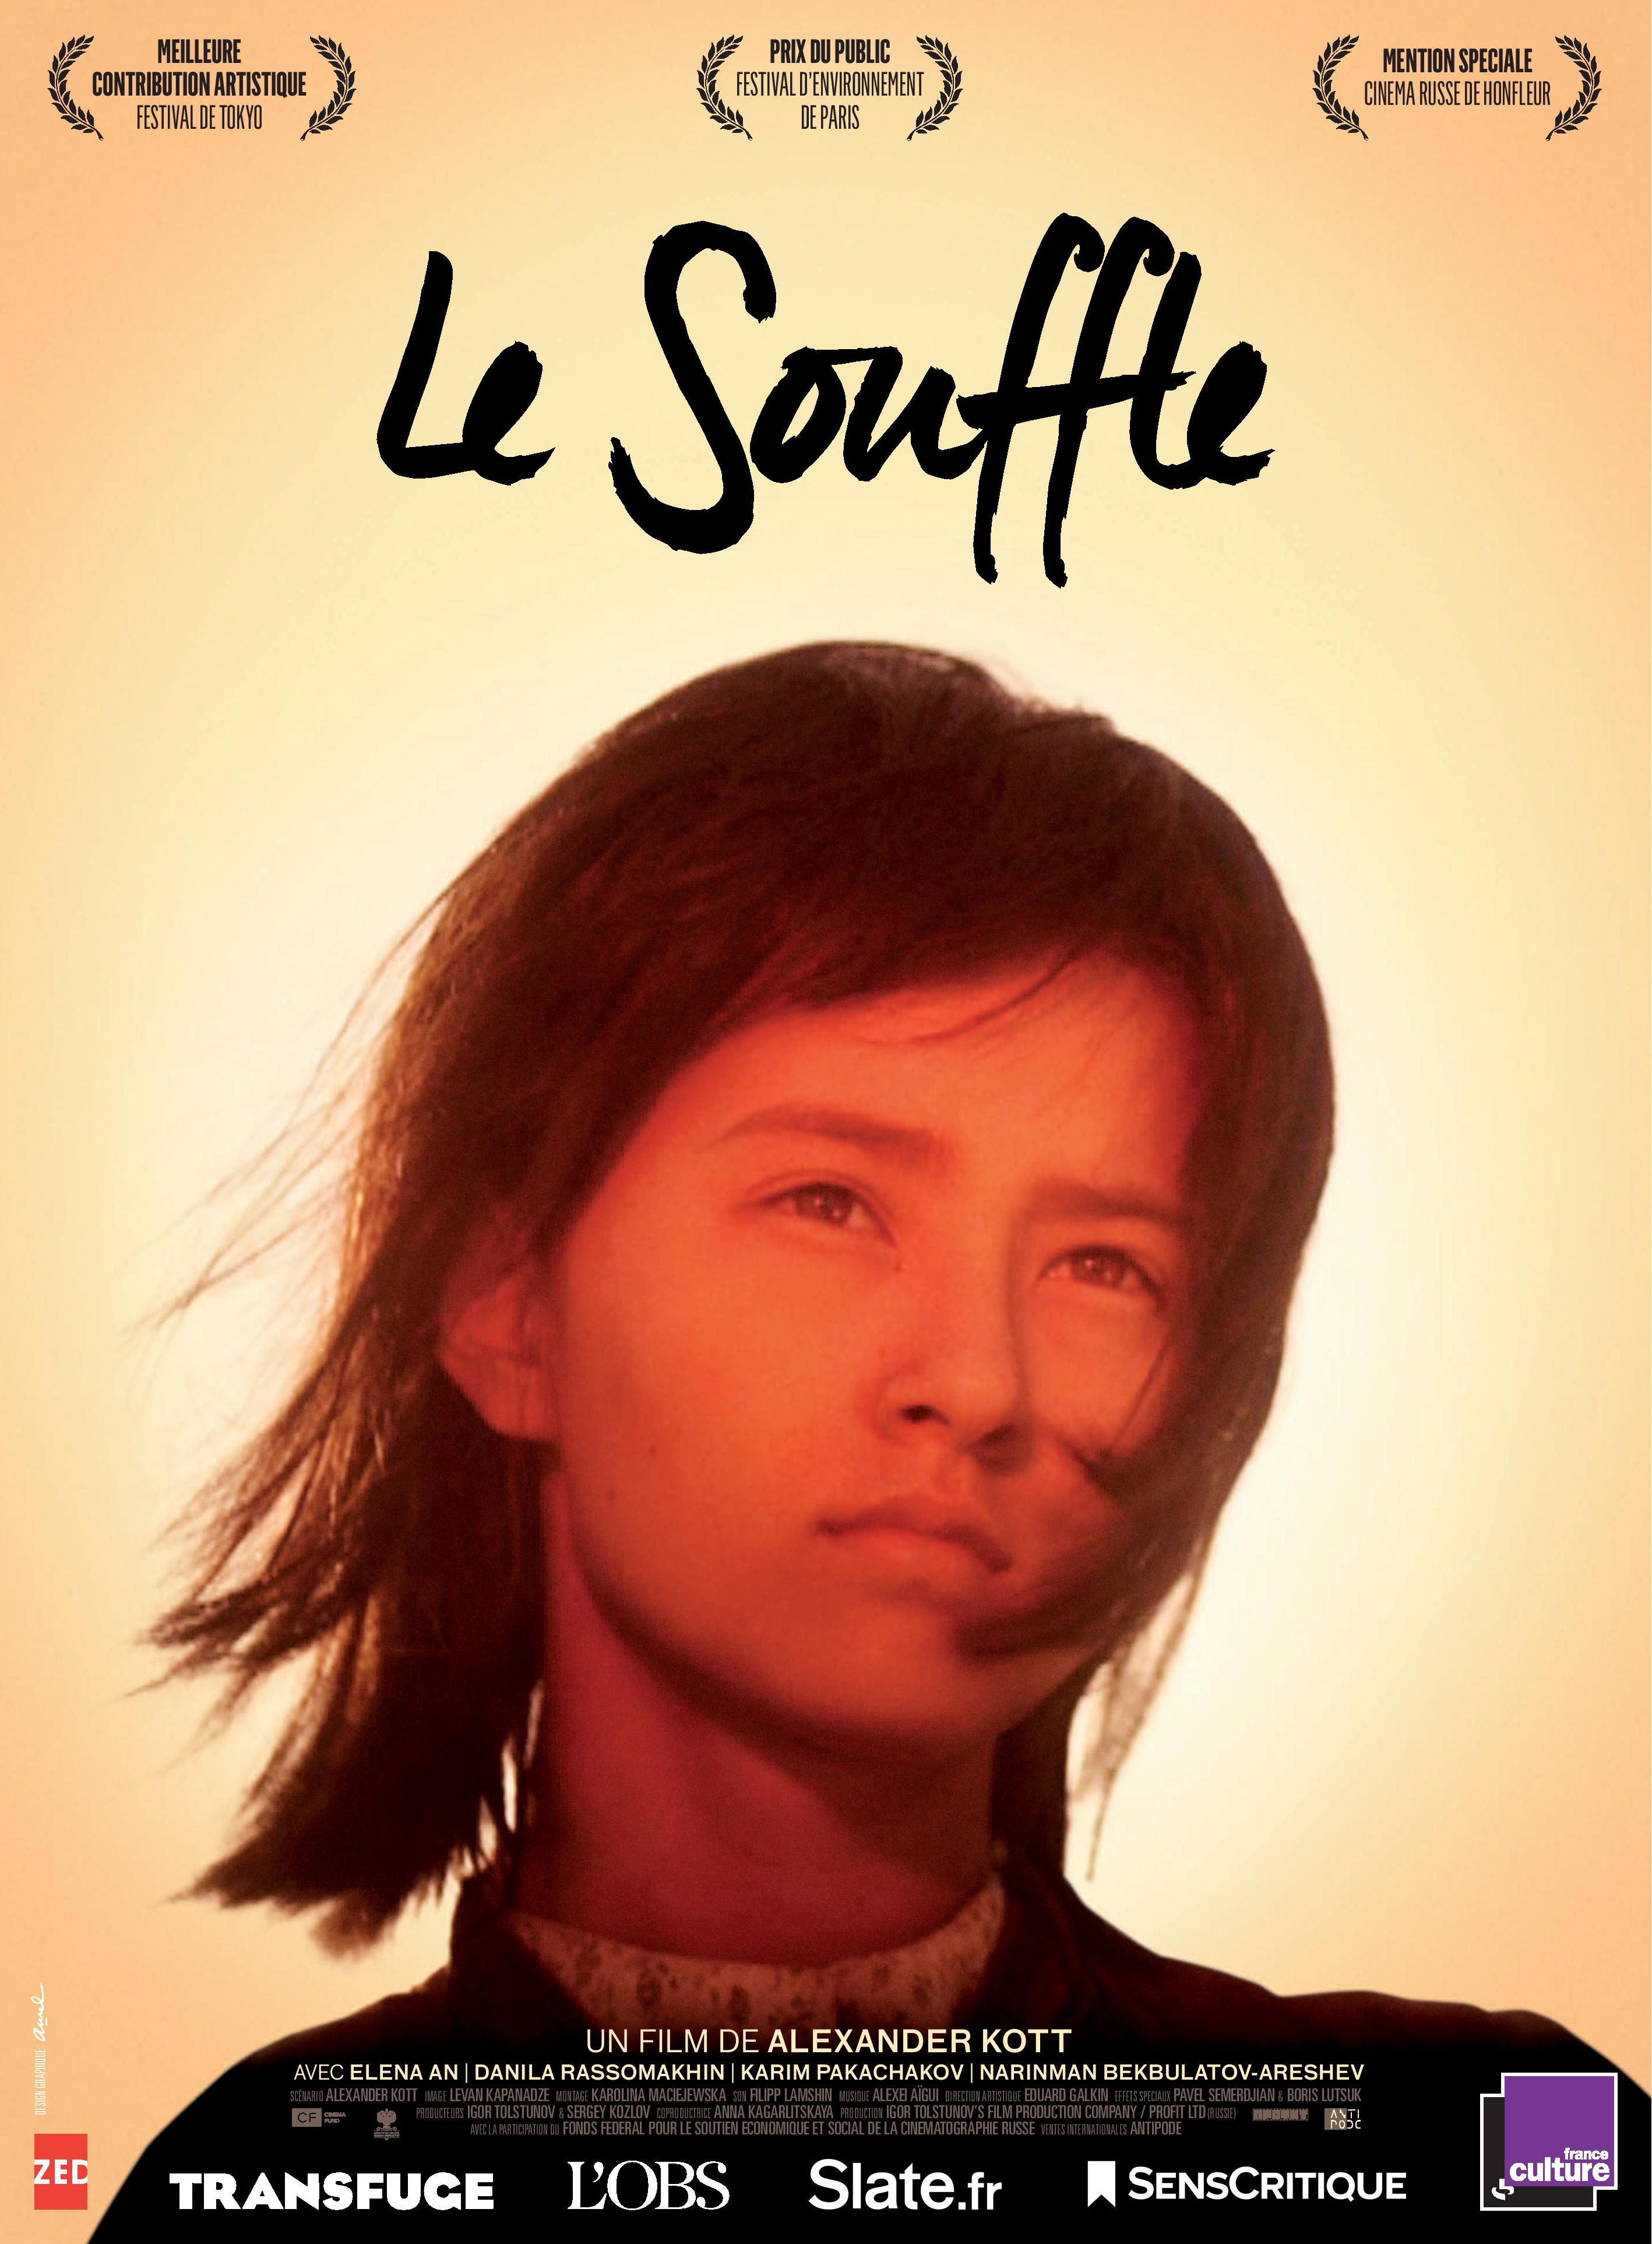 Le Souffle - Film (2015) streaming VF gratuit complet